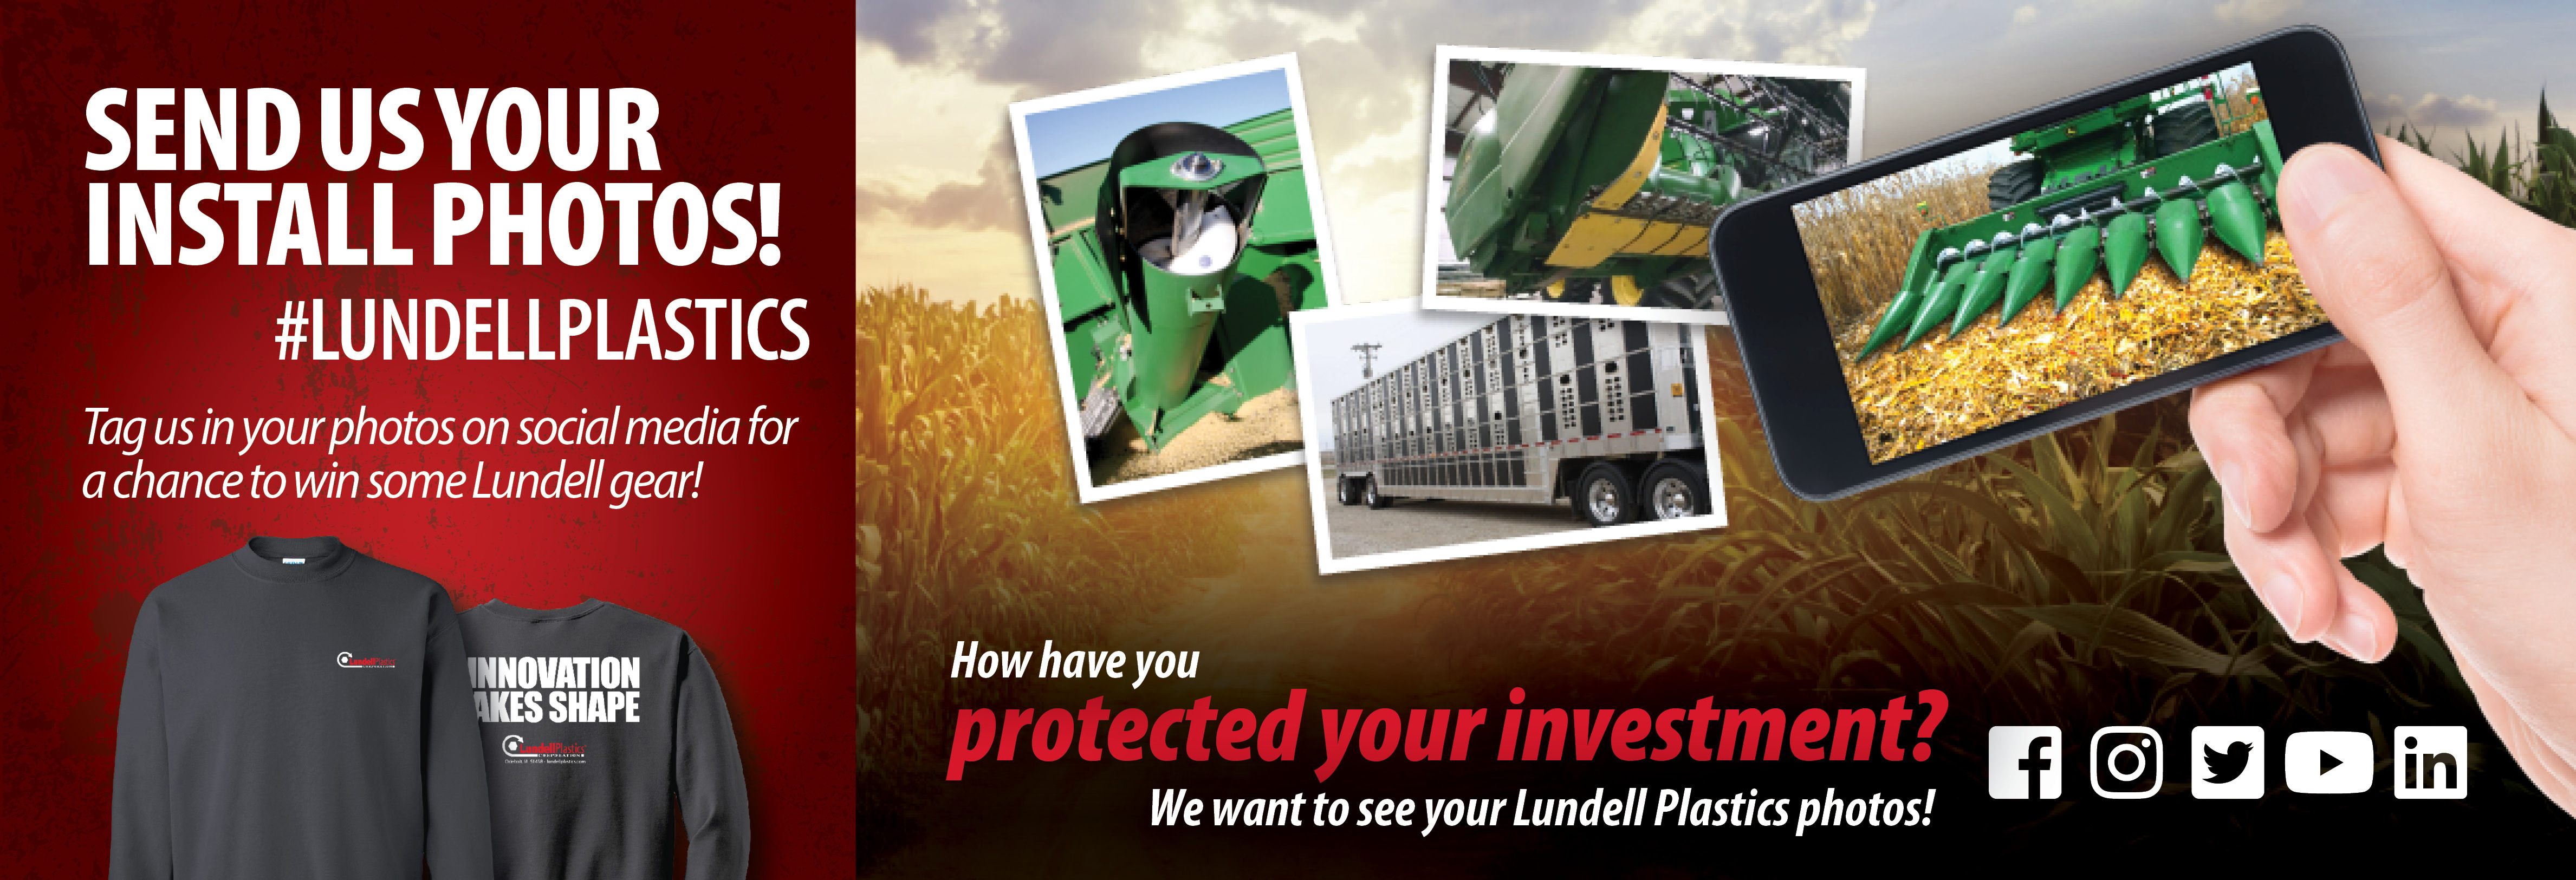 Send us your install photos! Tag us in your photos on social media for a chance to win some Lundell gear! How have you protected your investment? We want to see your Lundell Plastics photos!